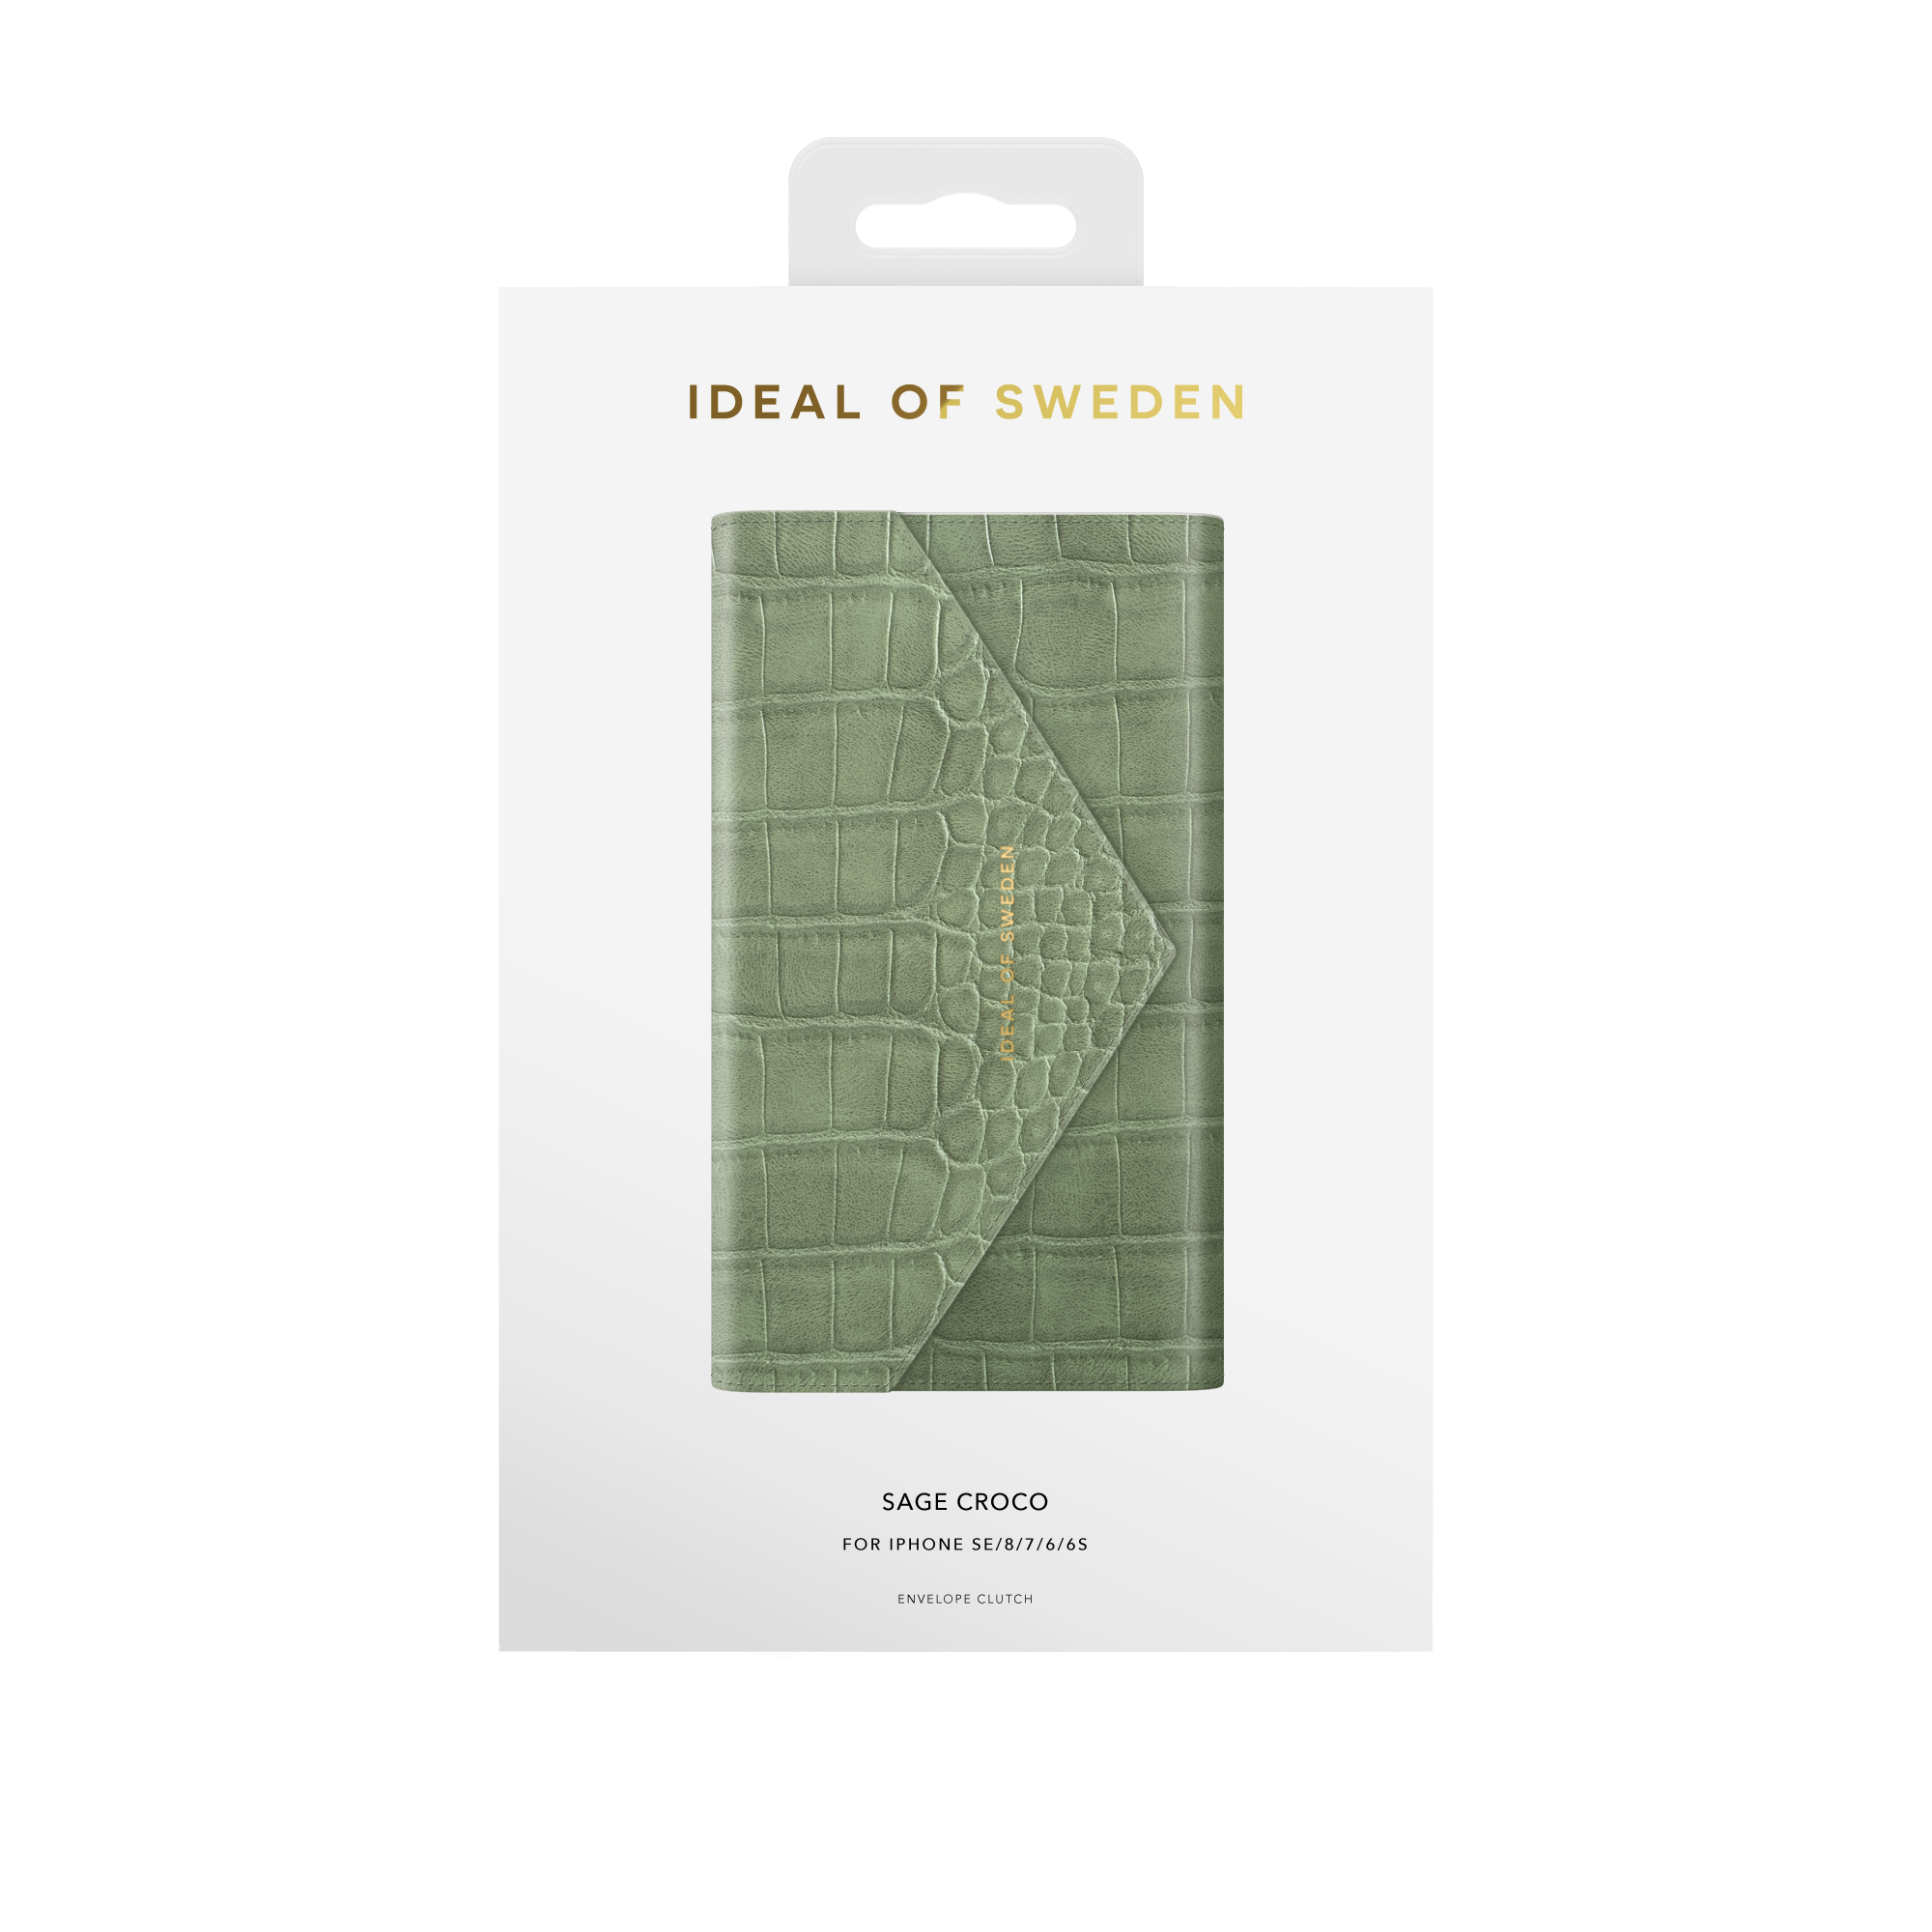 IDEAL OF iPhone Apple Apple iPhone iPhone 8, 6(S), Croco SE iPhone Apple Apple Apple, Bookcover, IDECSS20-I7-210, 7, (2020), Sage SWEDEN